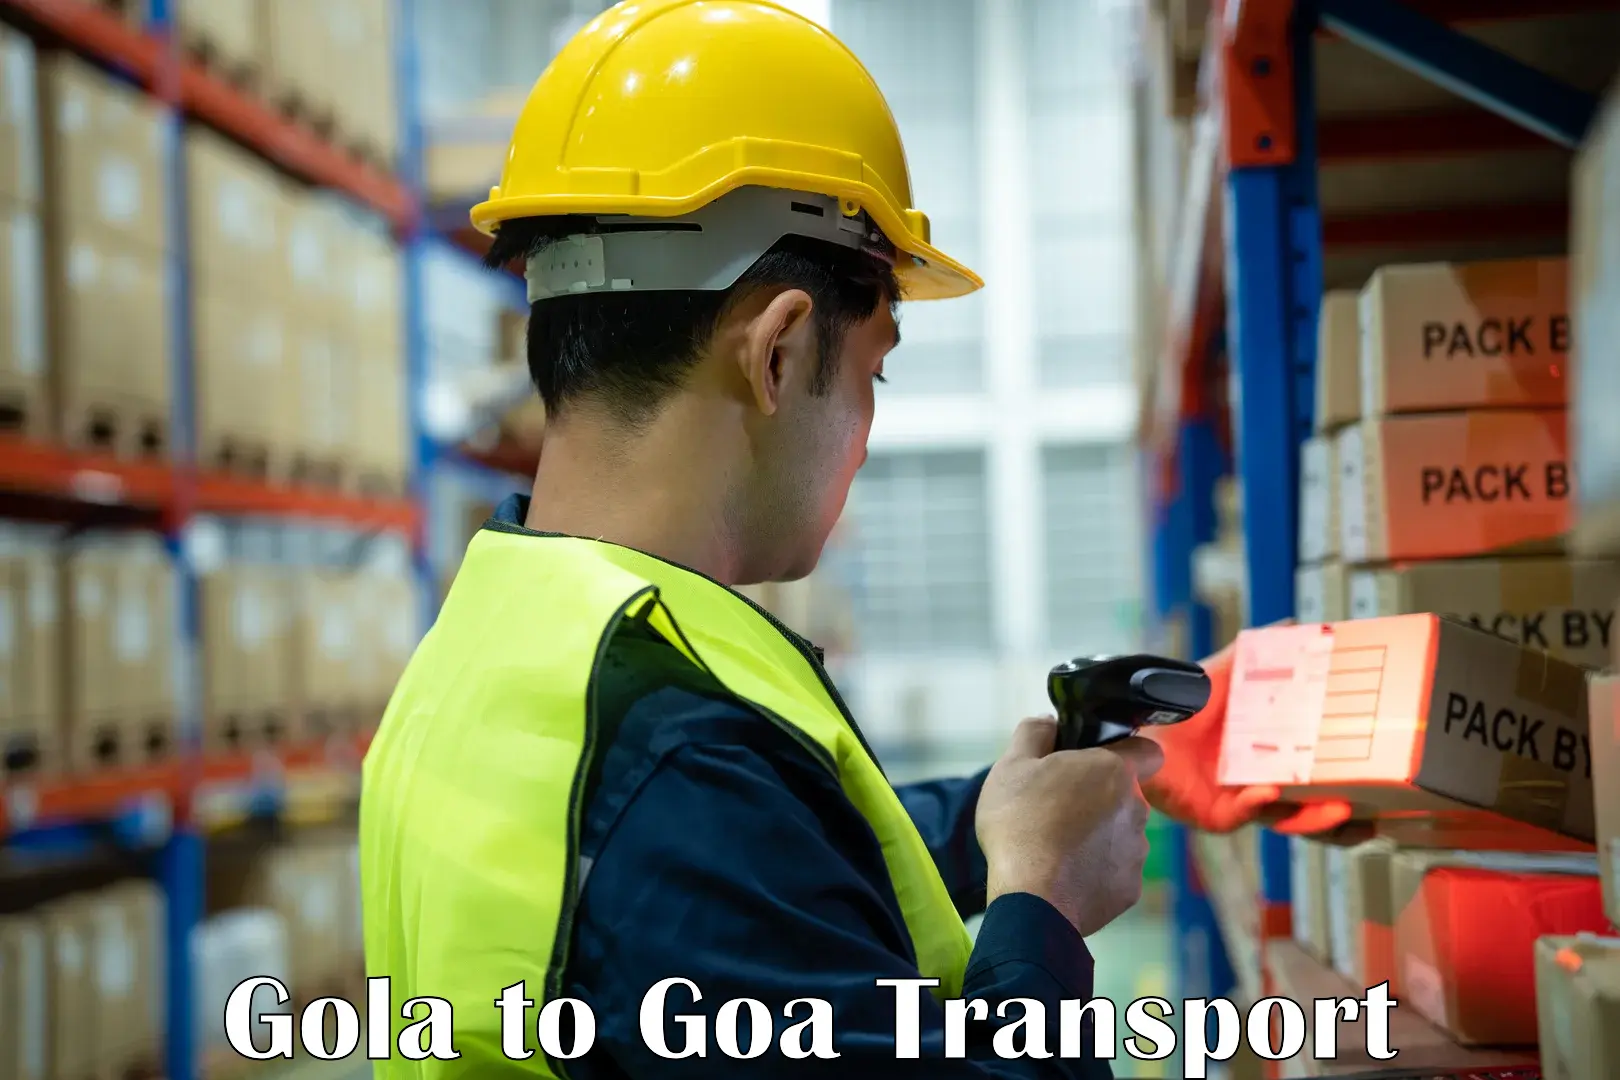 Online transport service Gola to South Goa